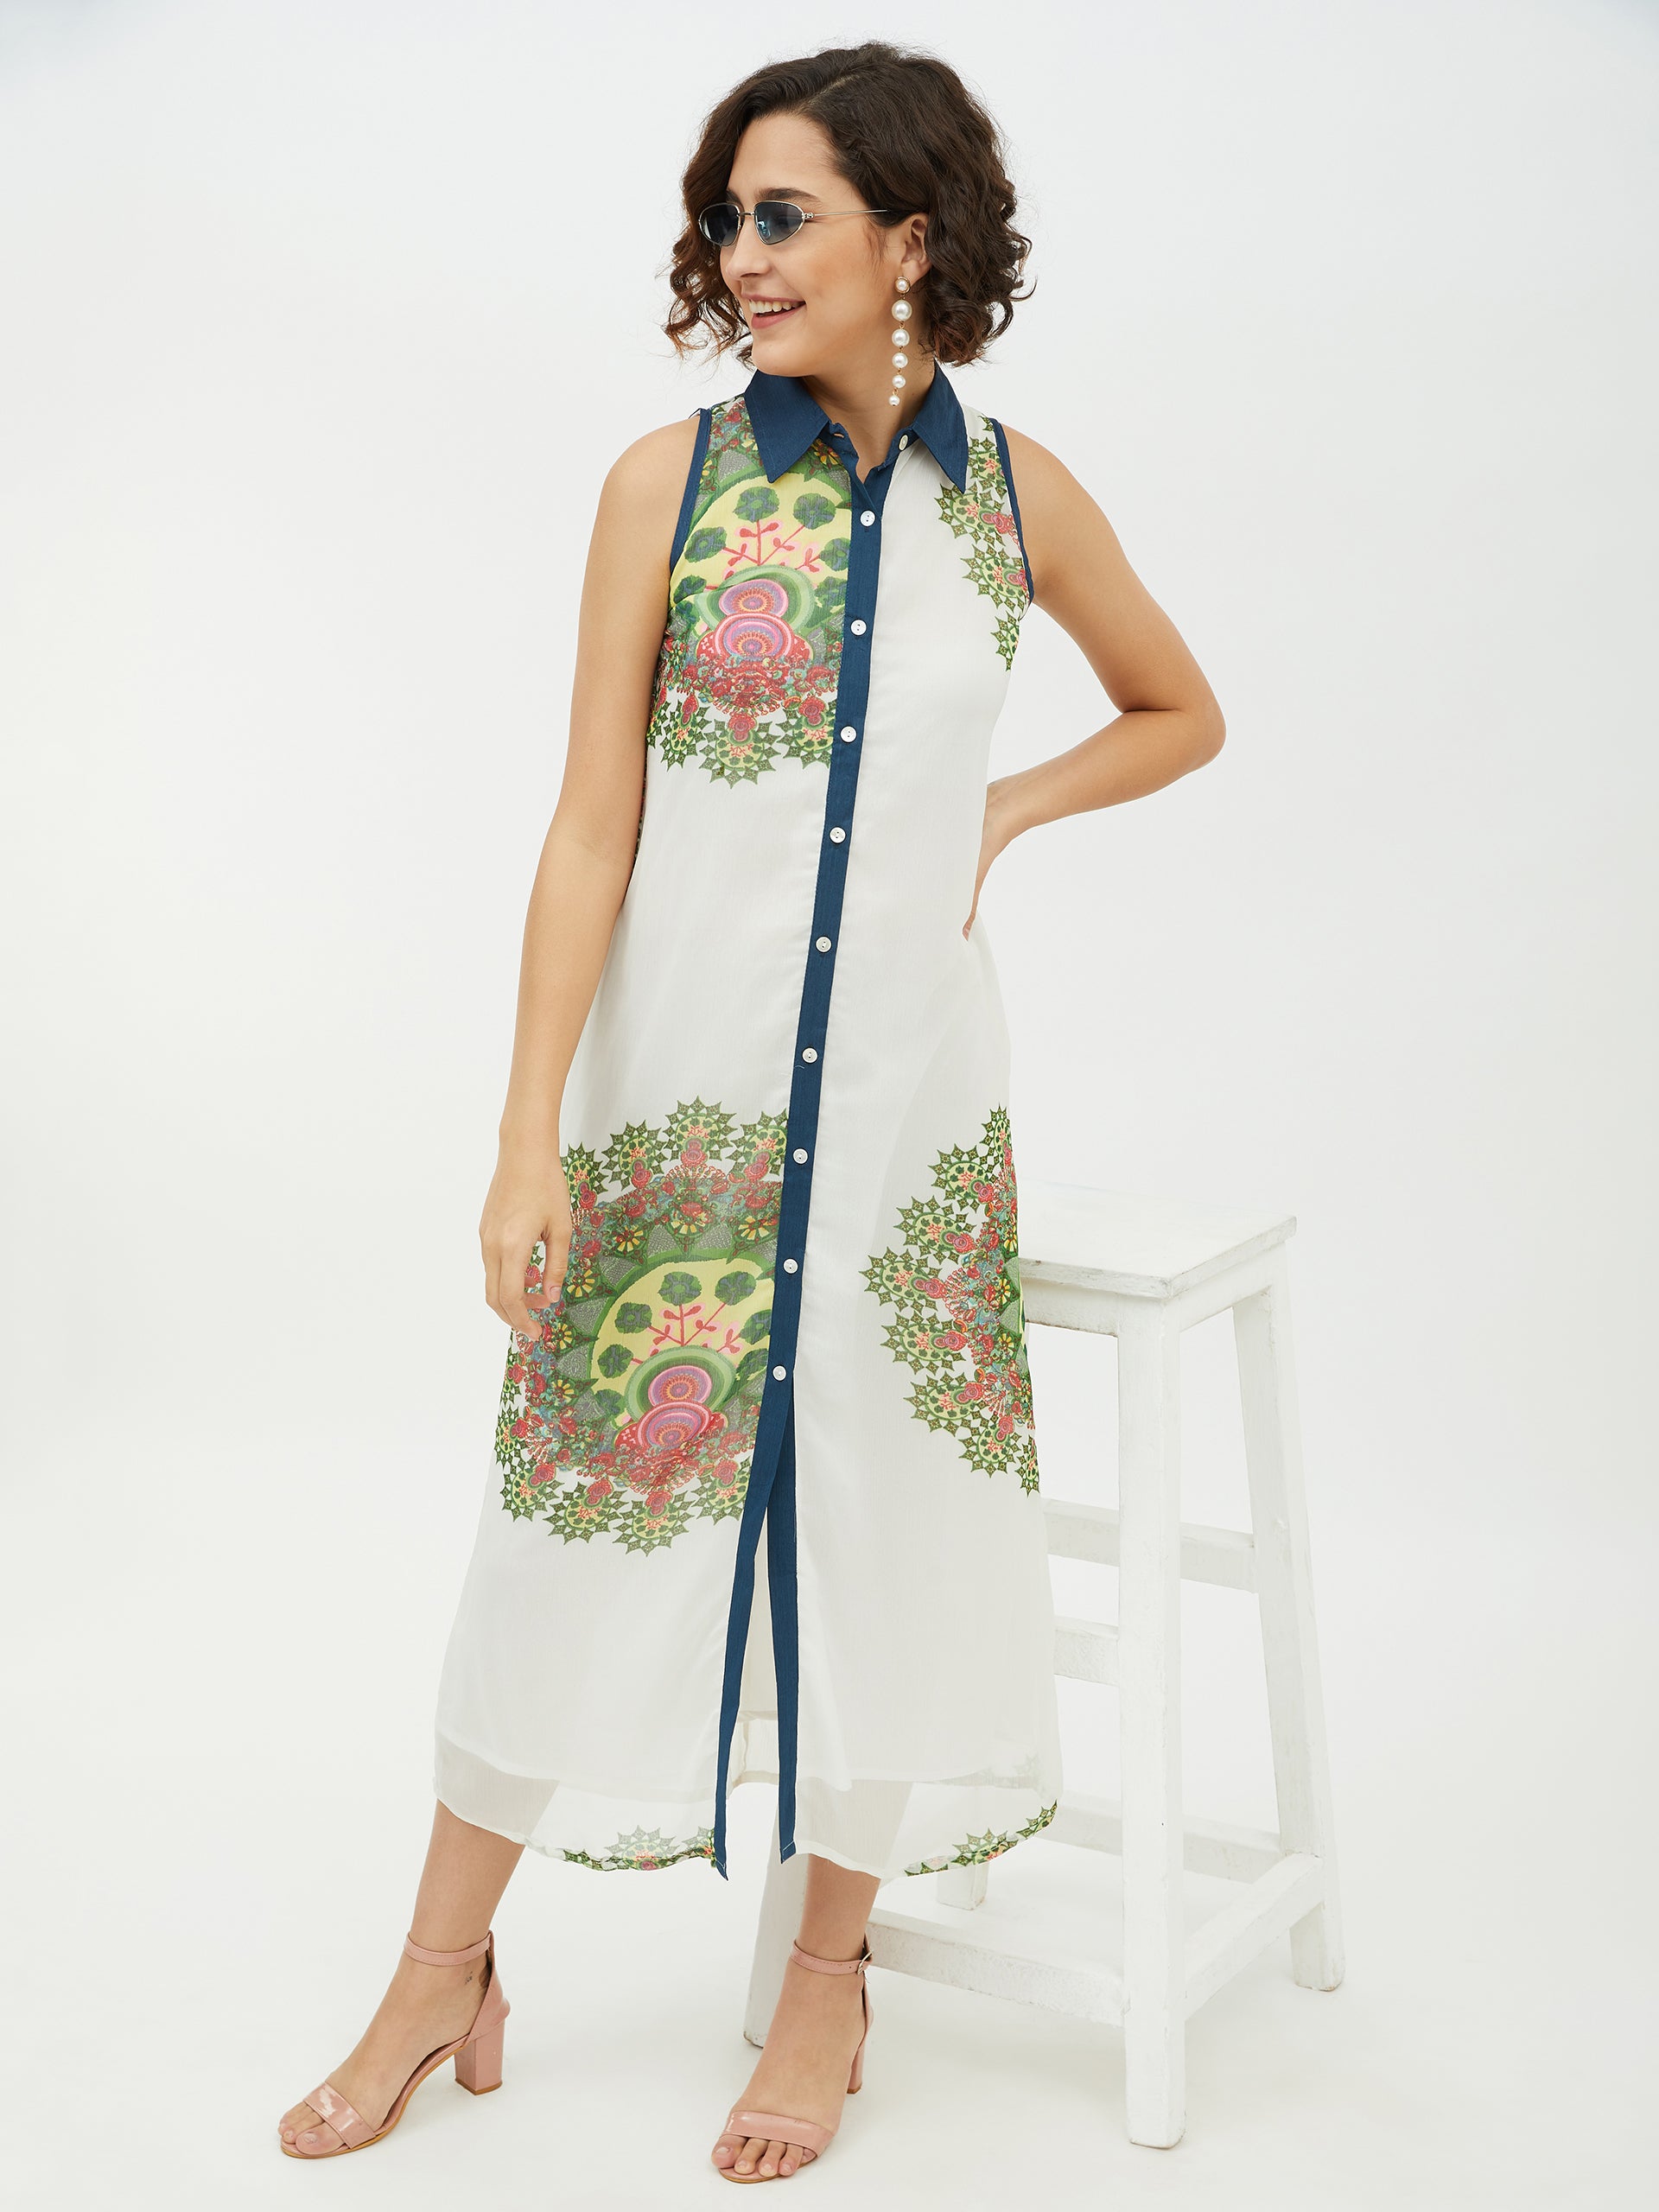 Women's Polyester Georgette Floral Printed Long Dress - StyleStone